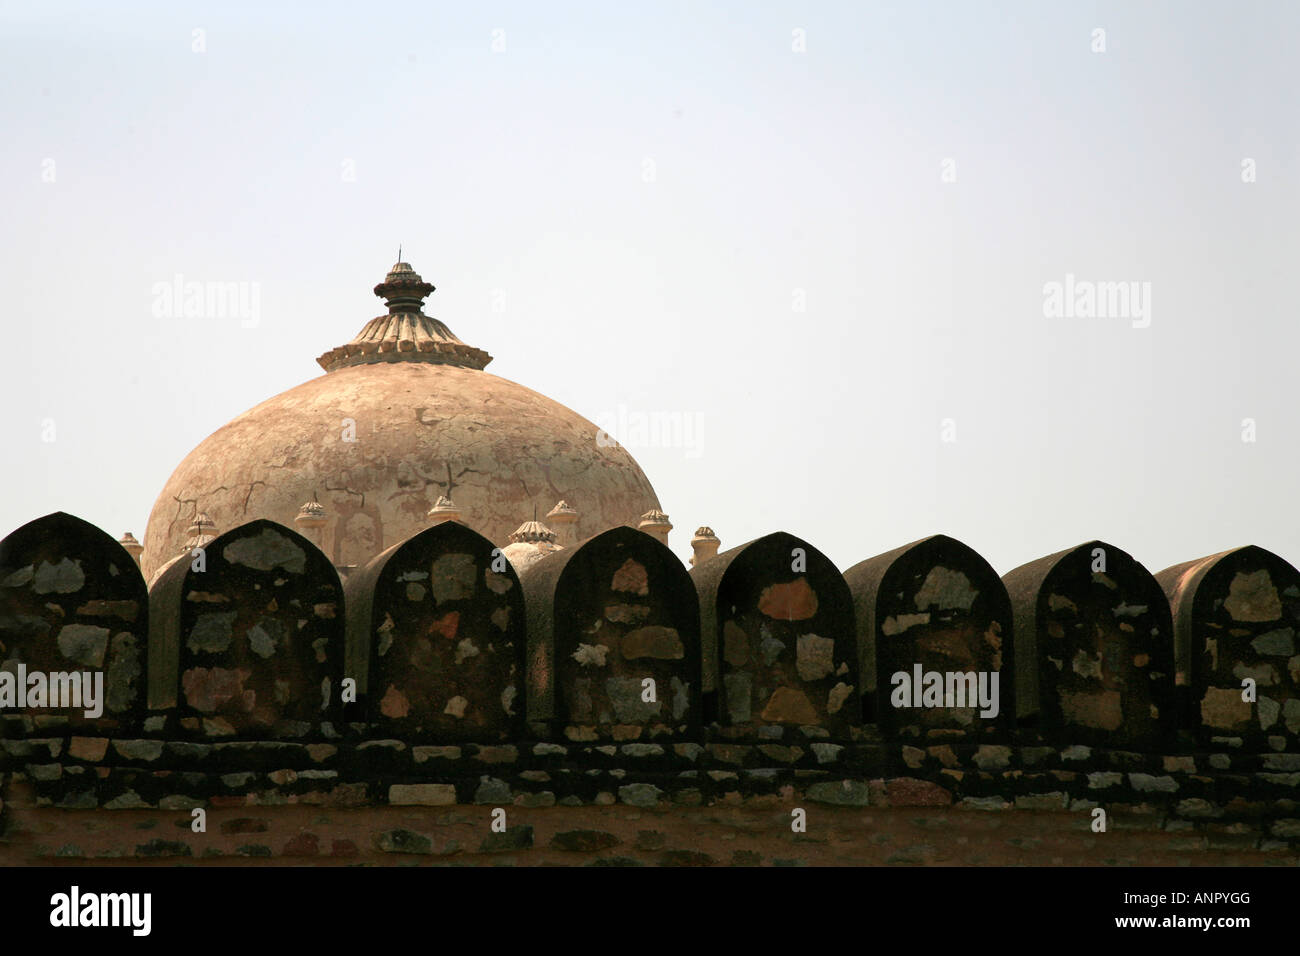 Architectural details and historic shapes of dome and stone wall of Humayun's Tomb complex, UNESCO World Heritage site, Delhi, India Stock Photo